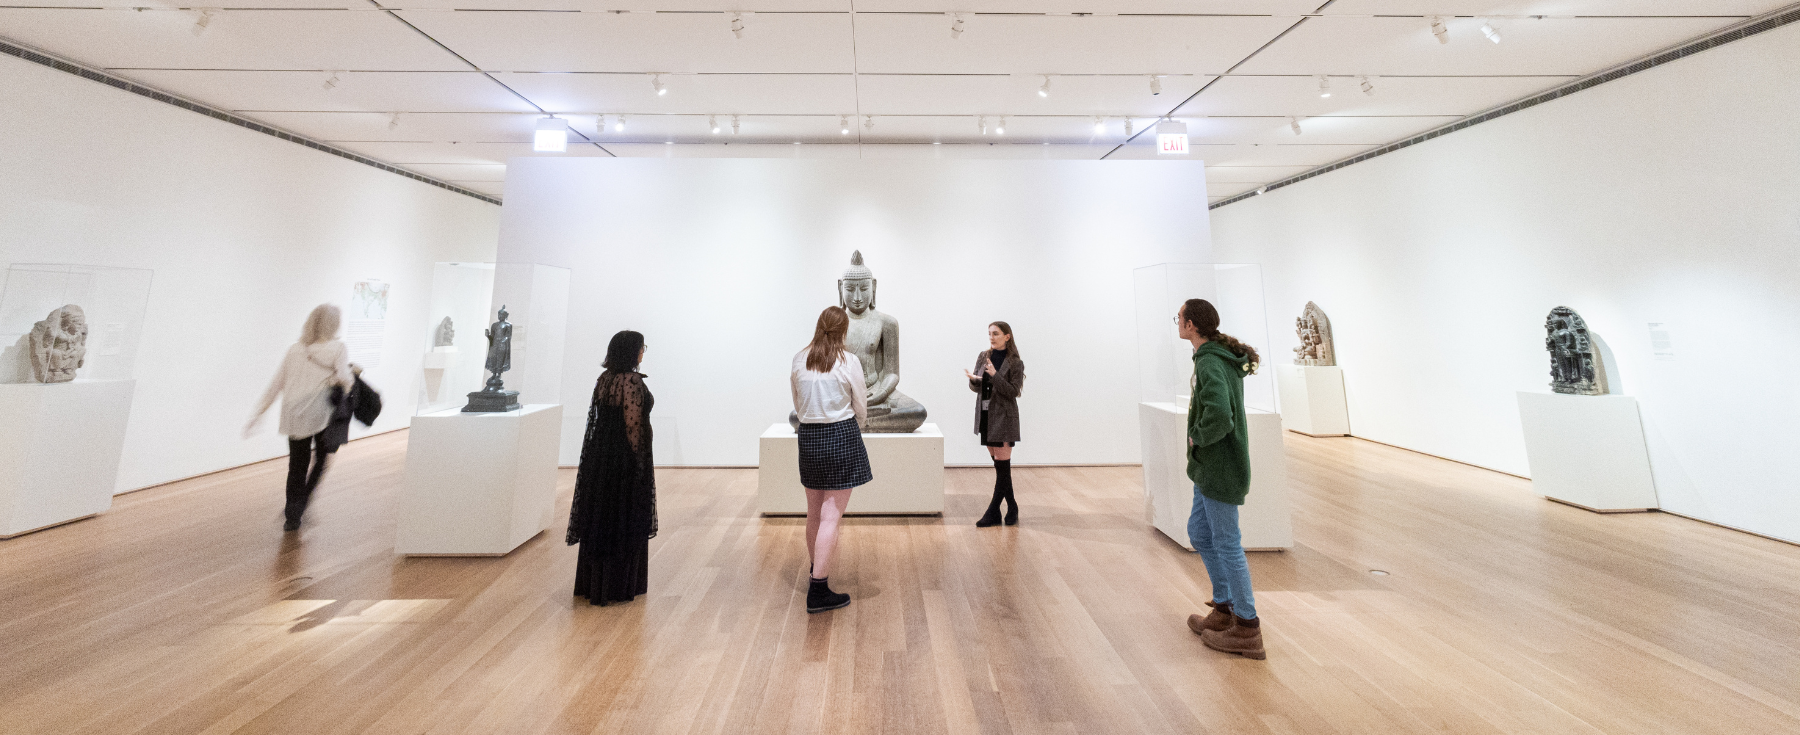 Loyola School of Education students integrate art into learning at the Art Institute of Chicago